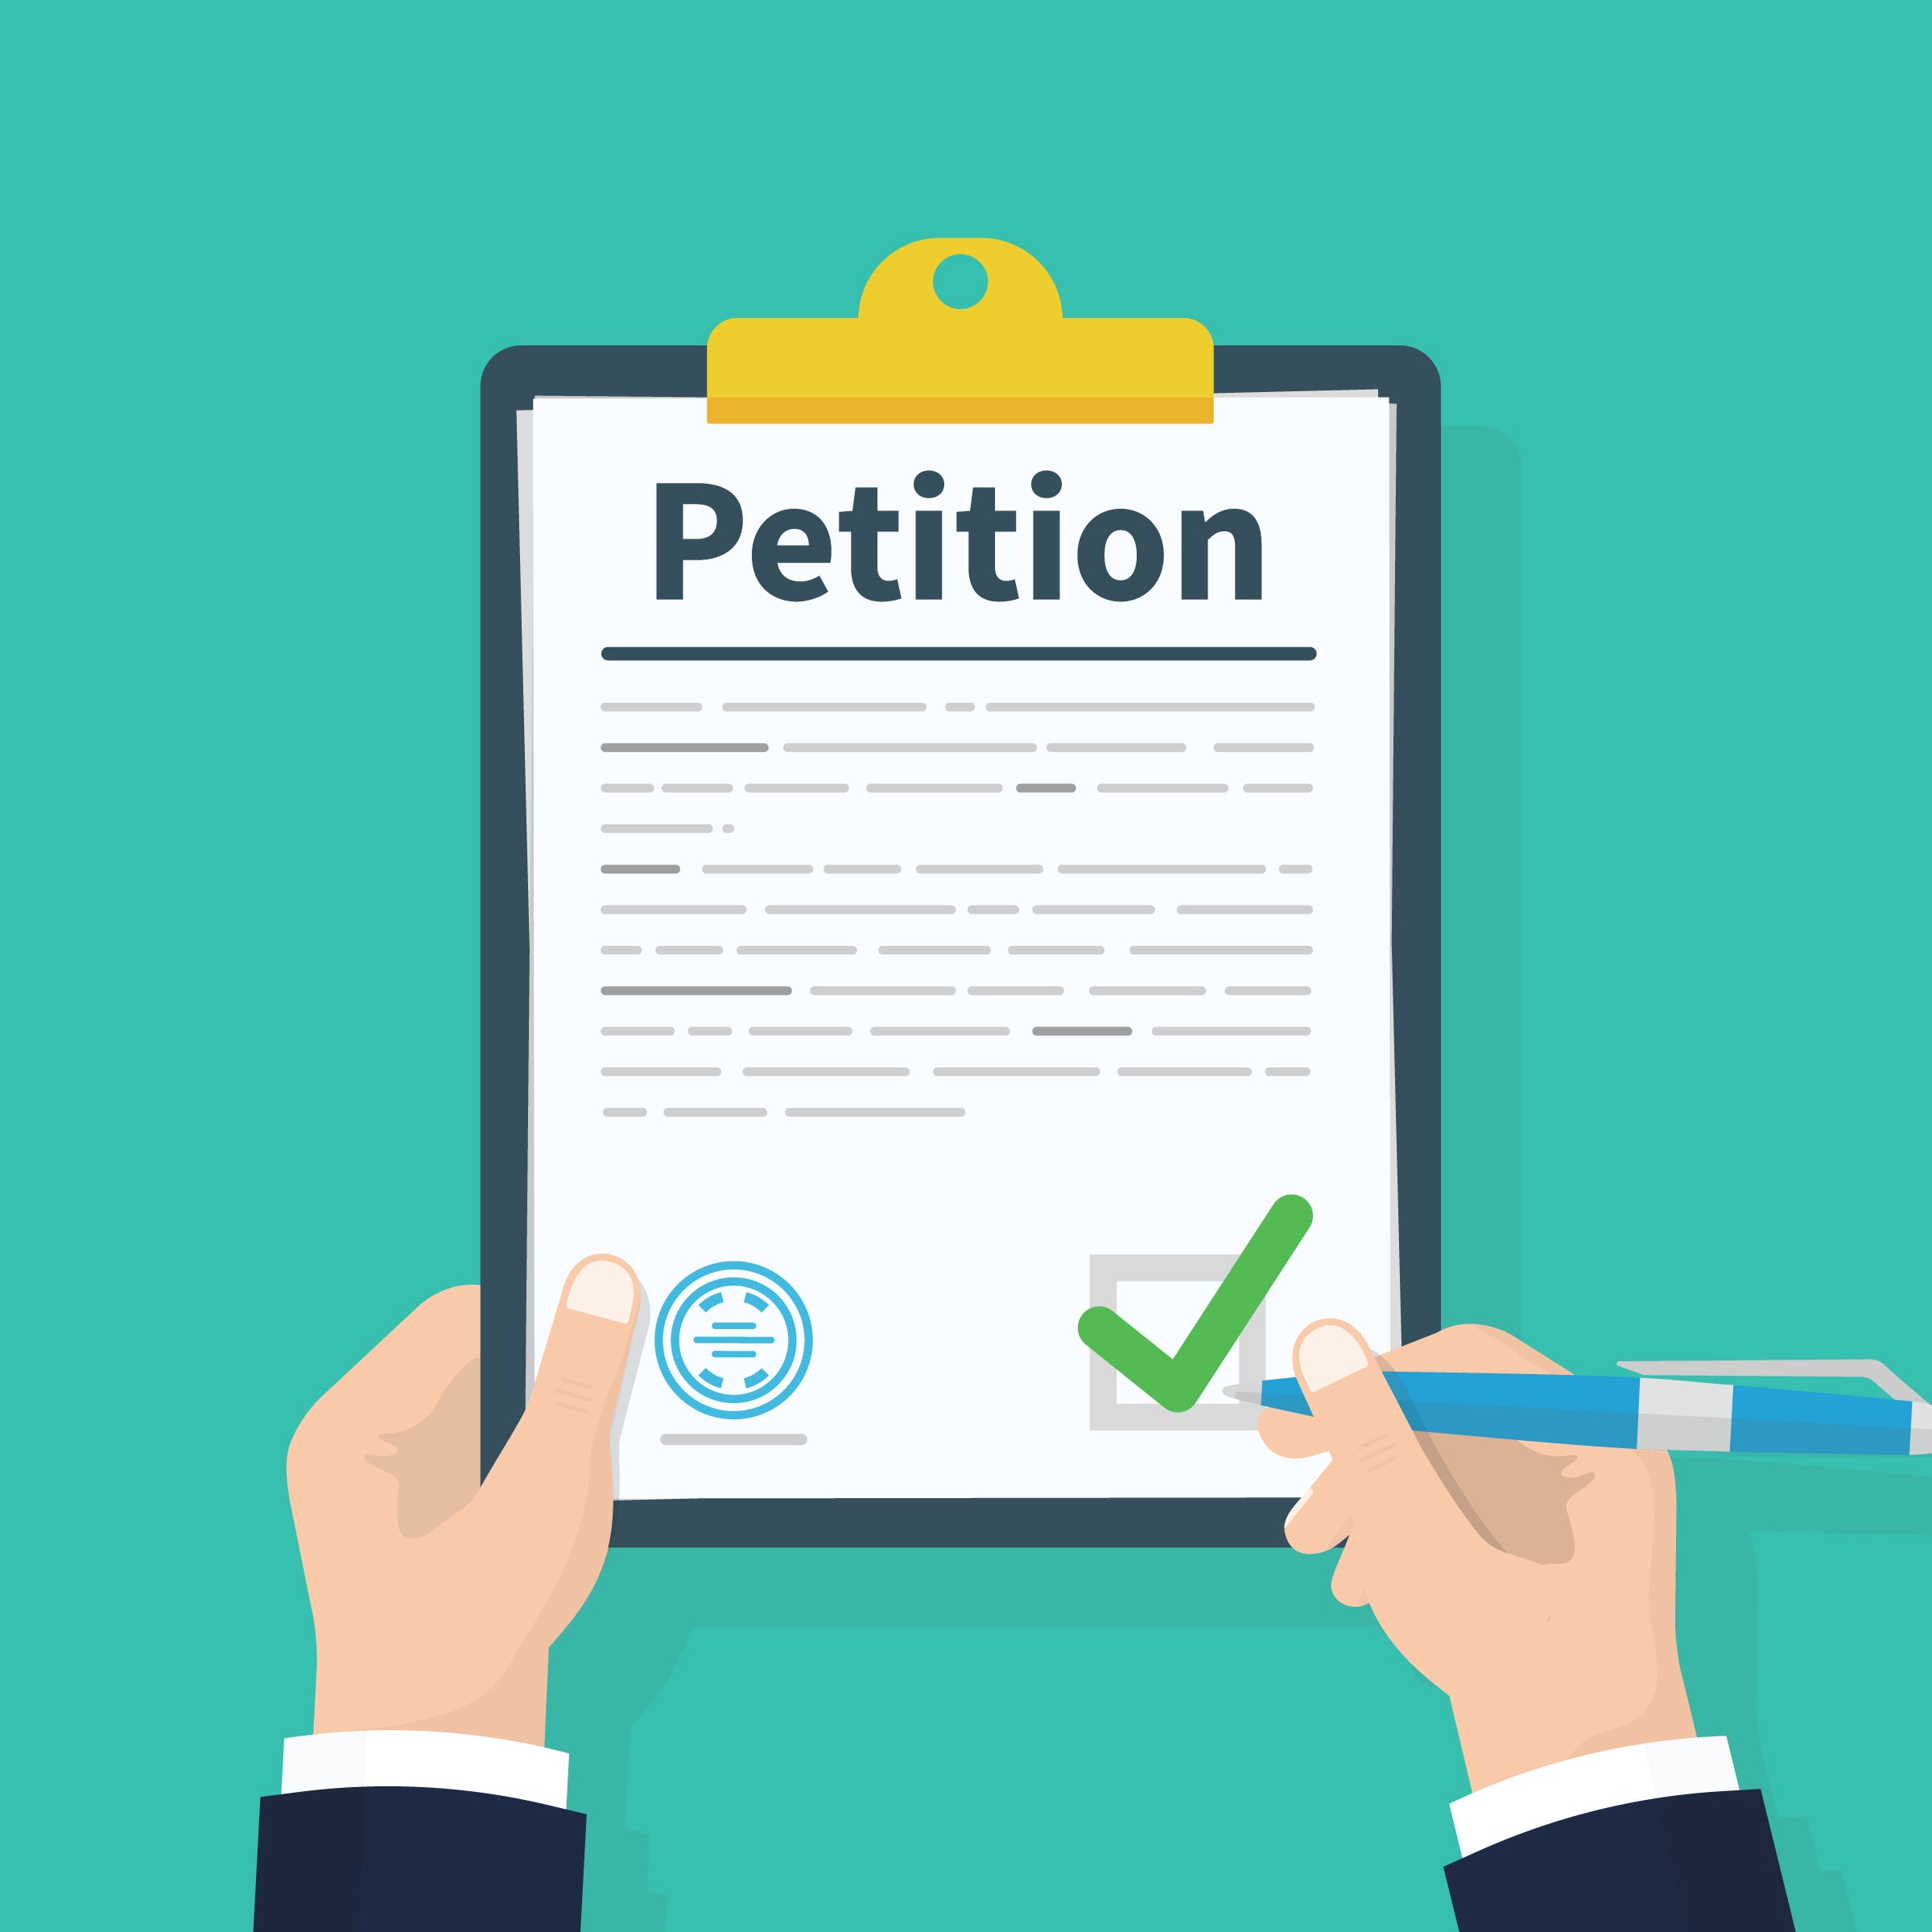 Illustration of hands holding a clipboard with a petition on it